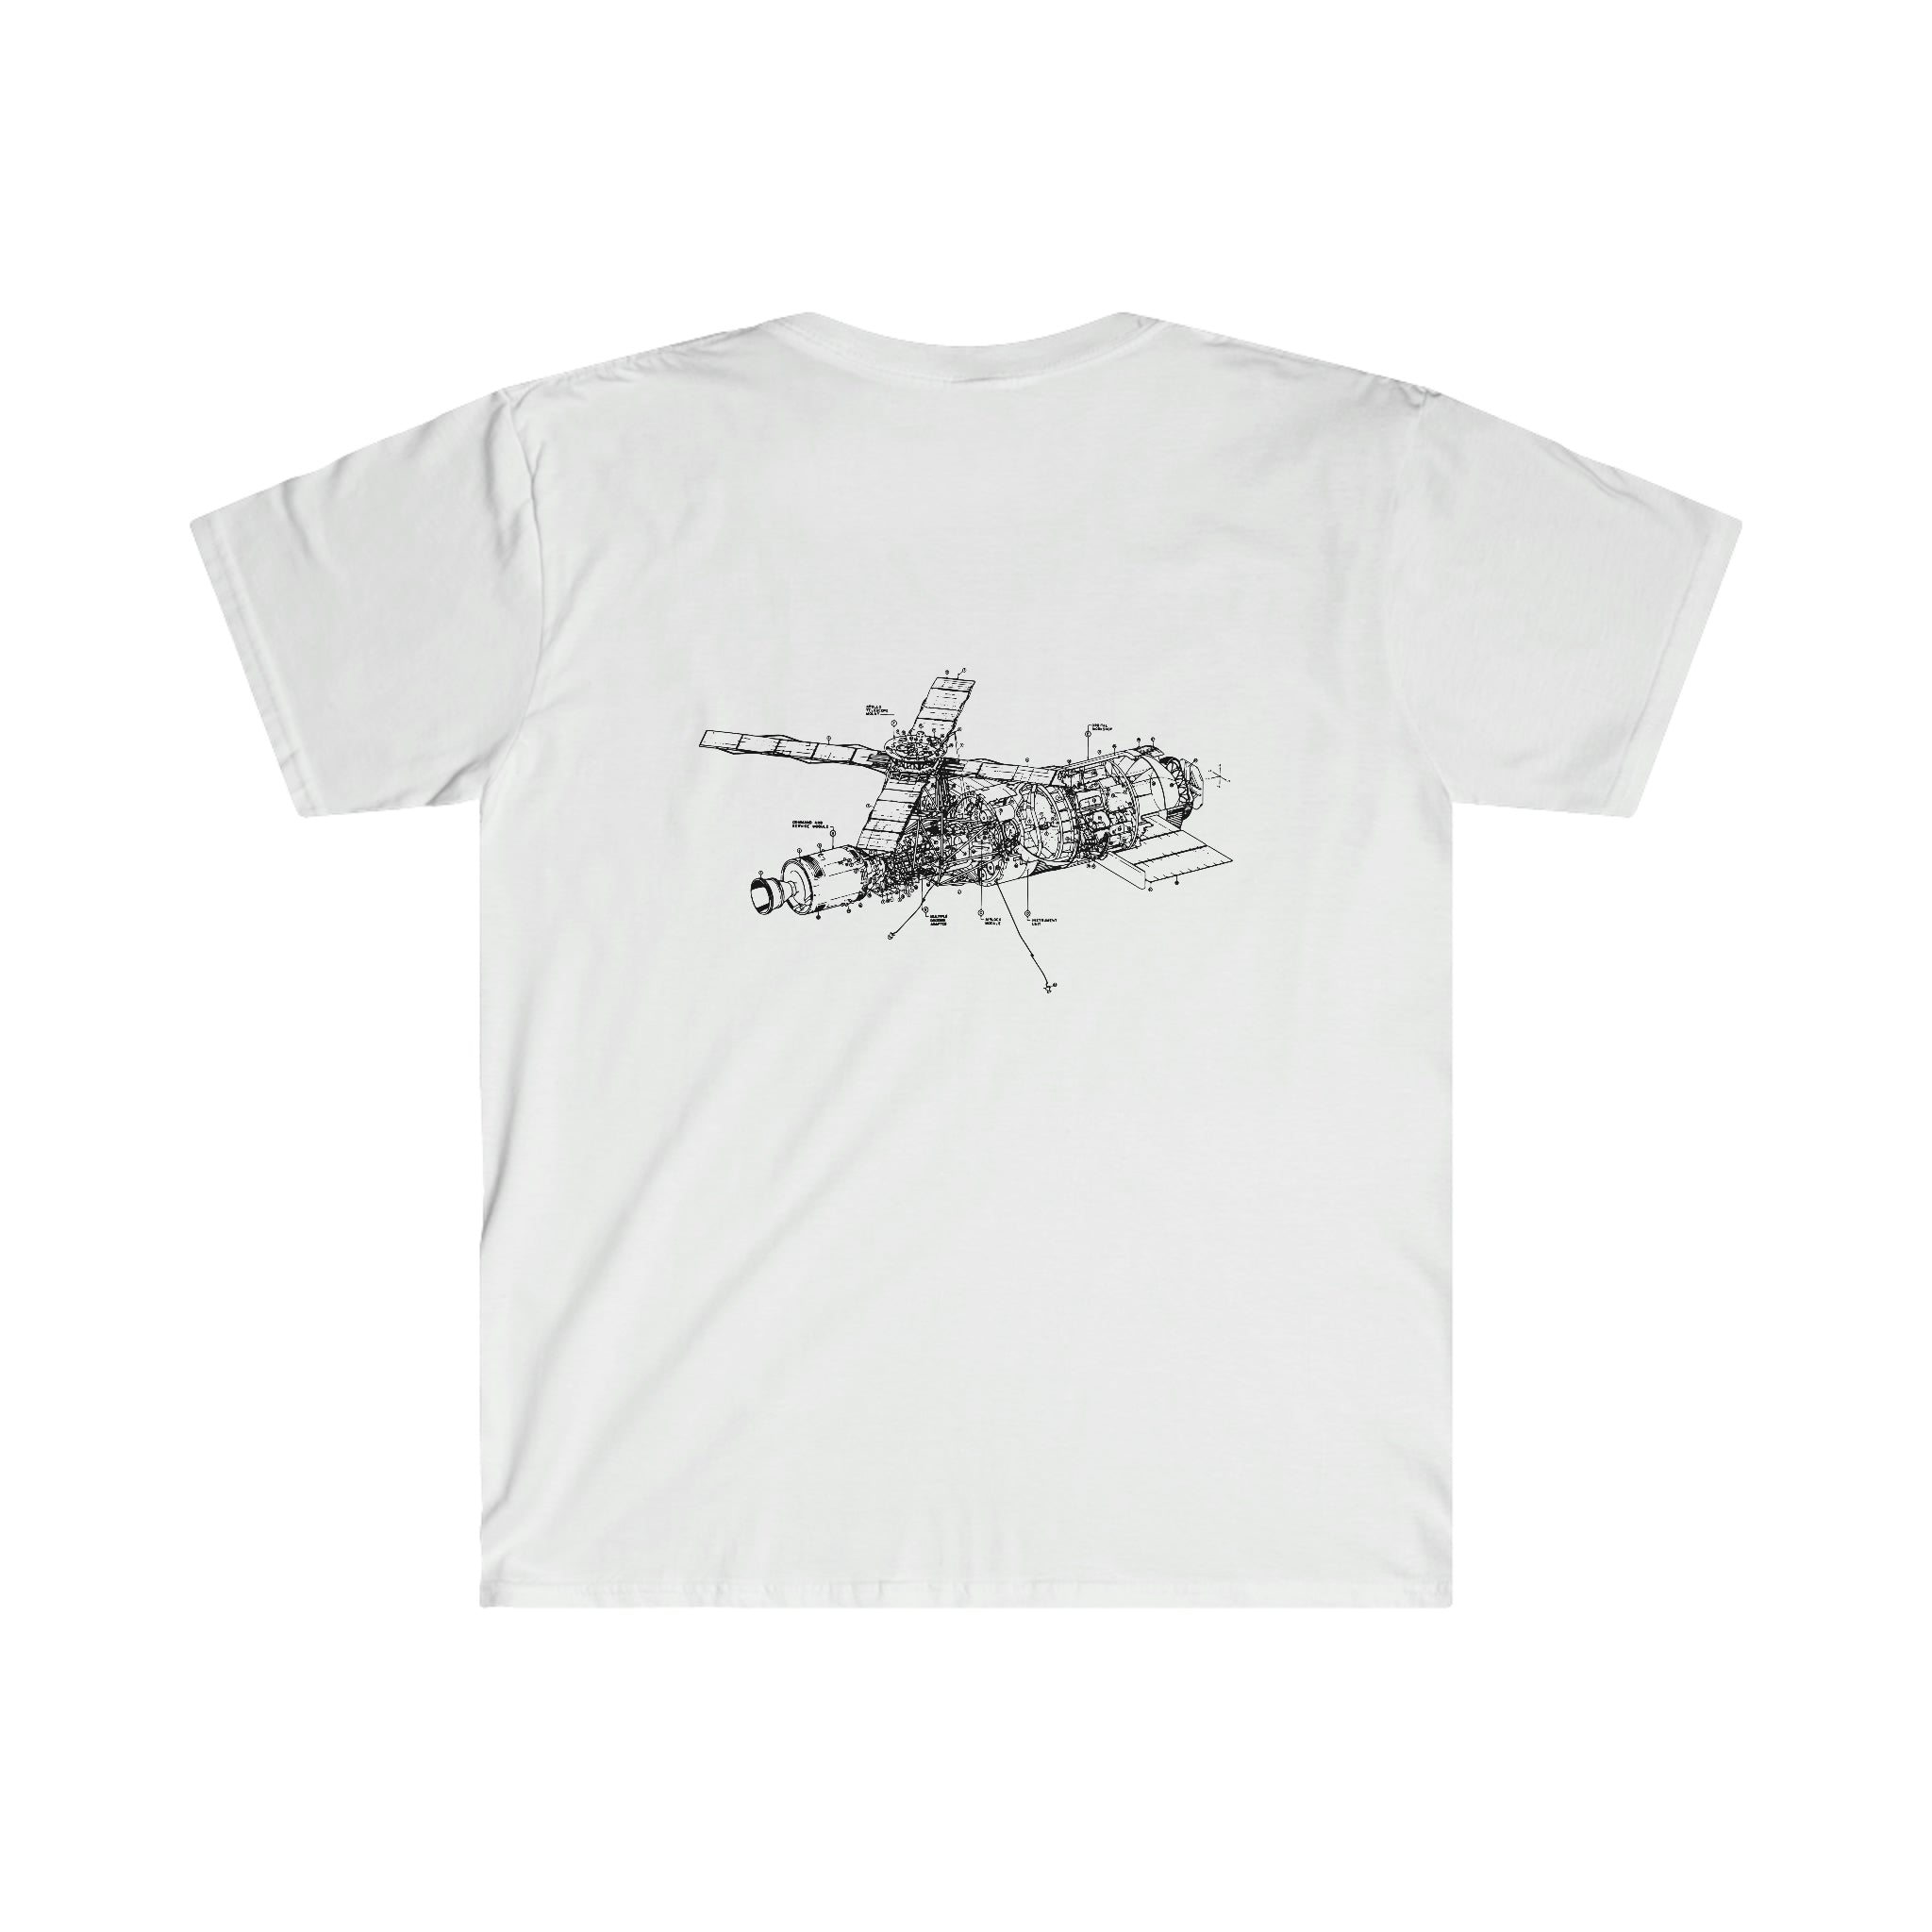 A Deep Deep Space white t-shirt with a drawing of a plane, from the One Tee Project.